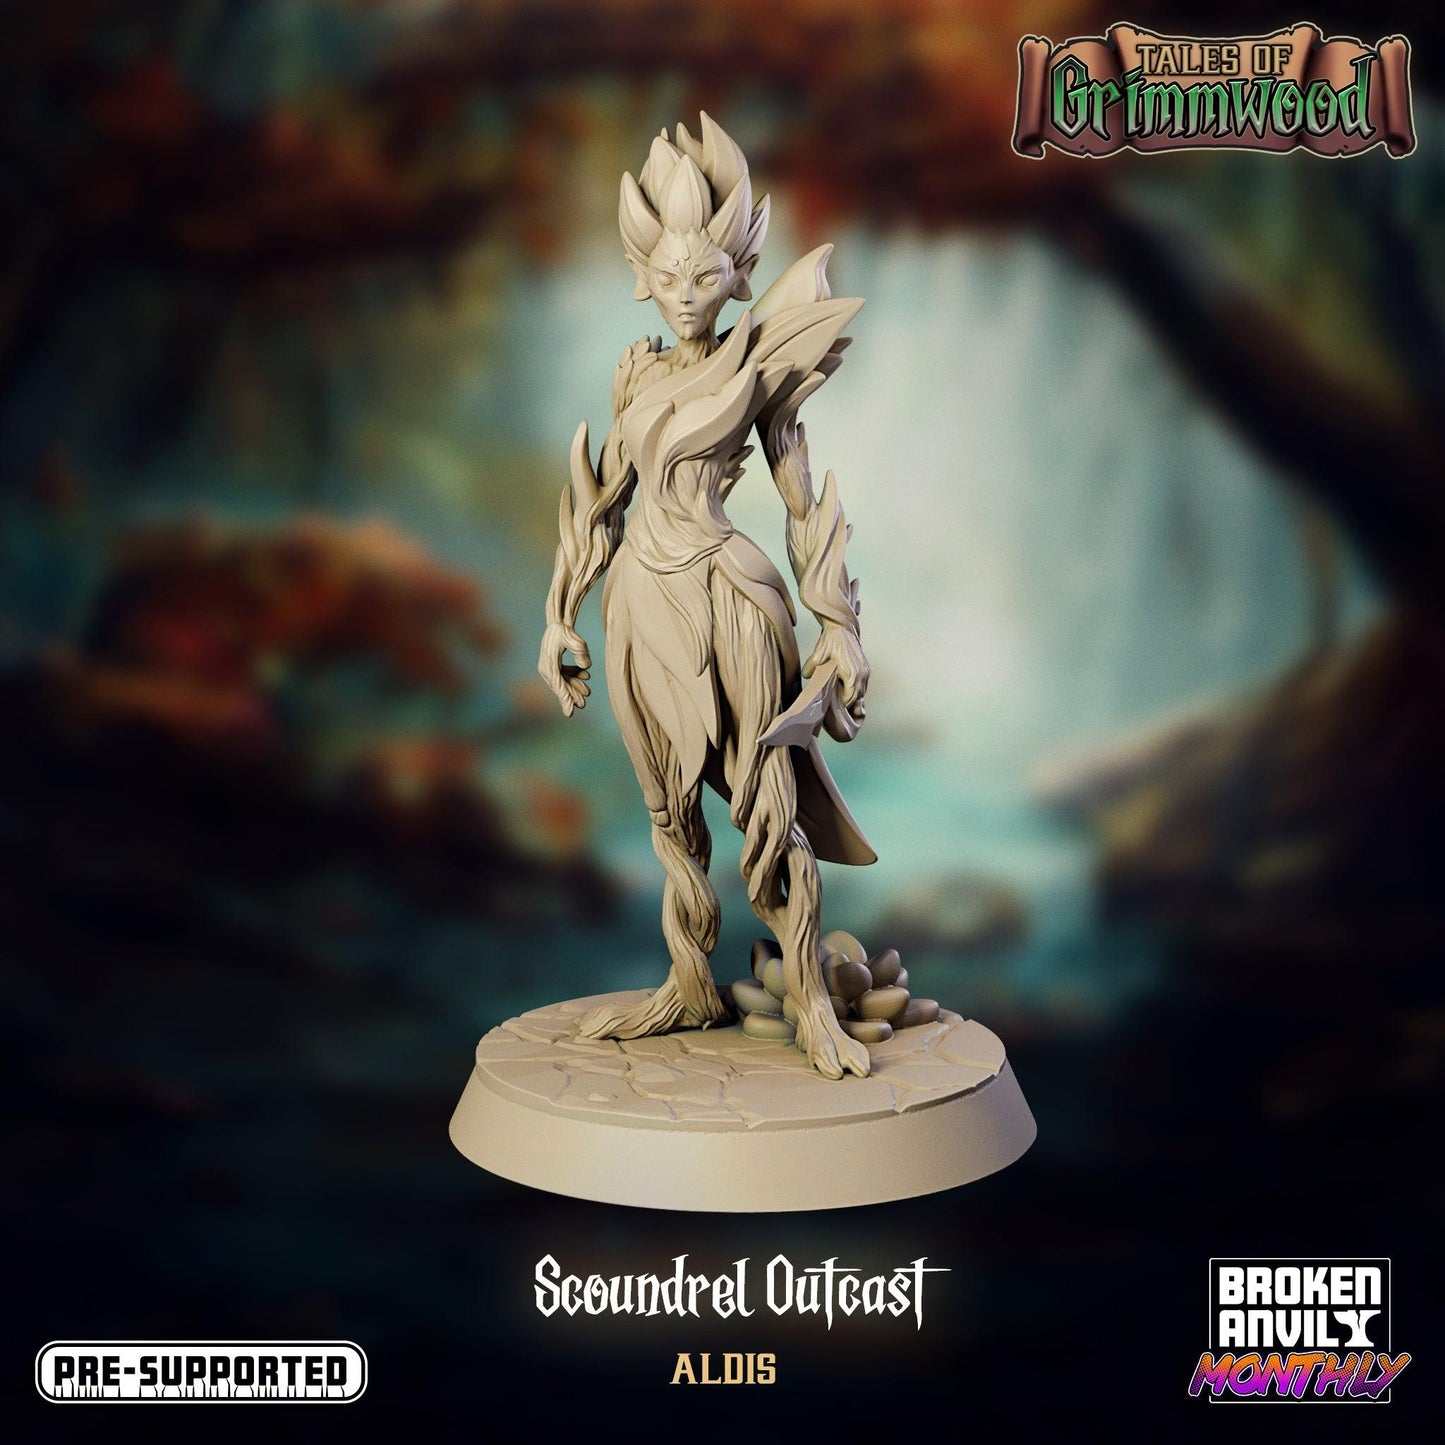 Dryad Scoundral Outcast - Tales of Grimmwood - TODO ROL SPAIN 